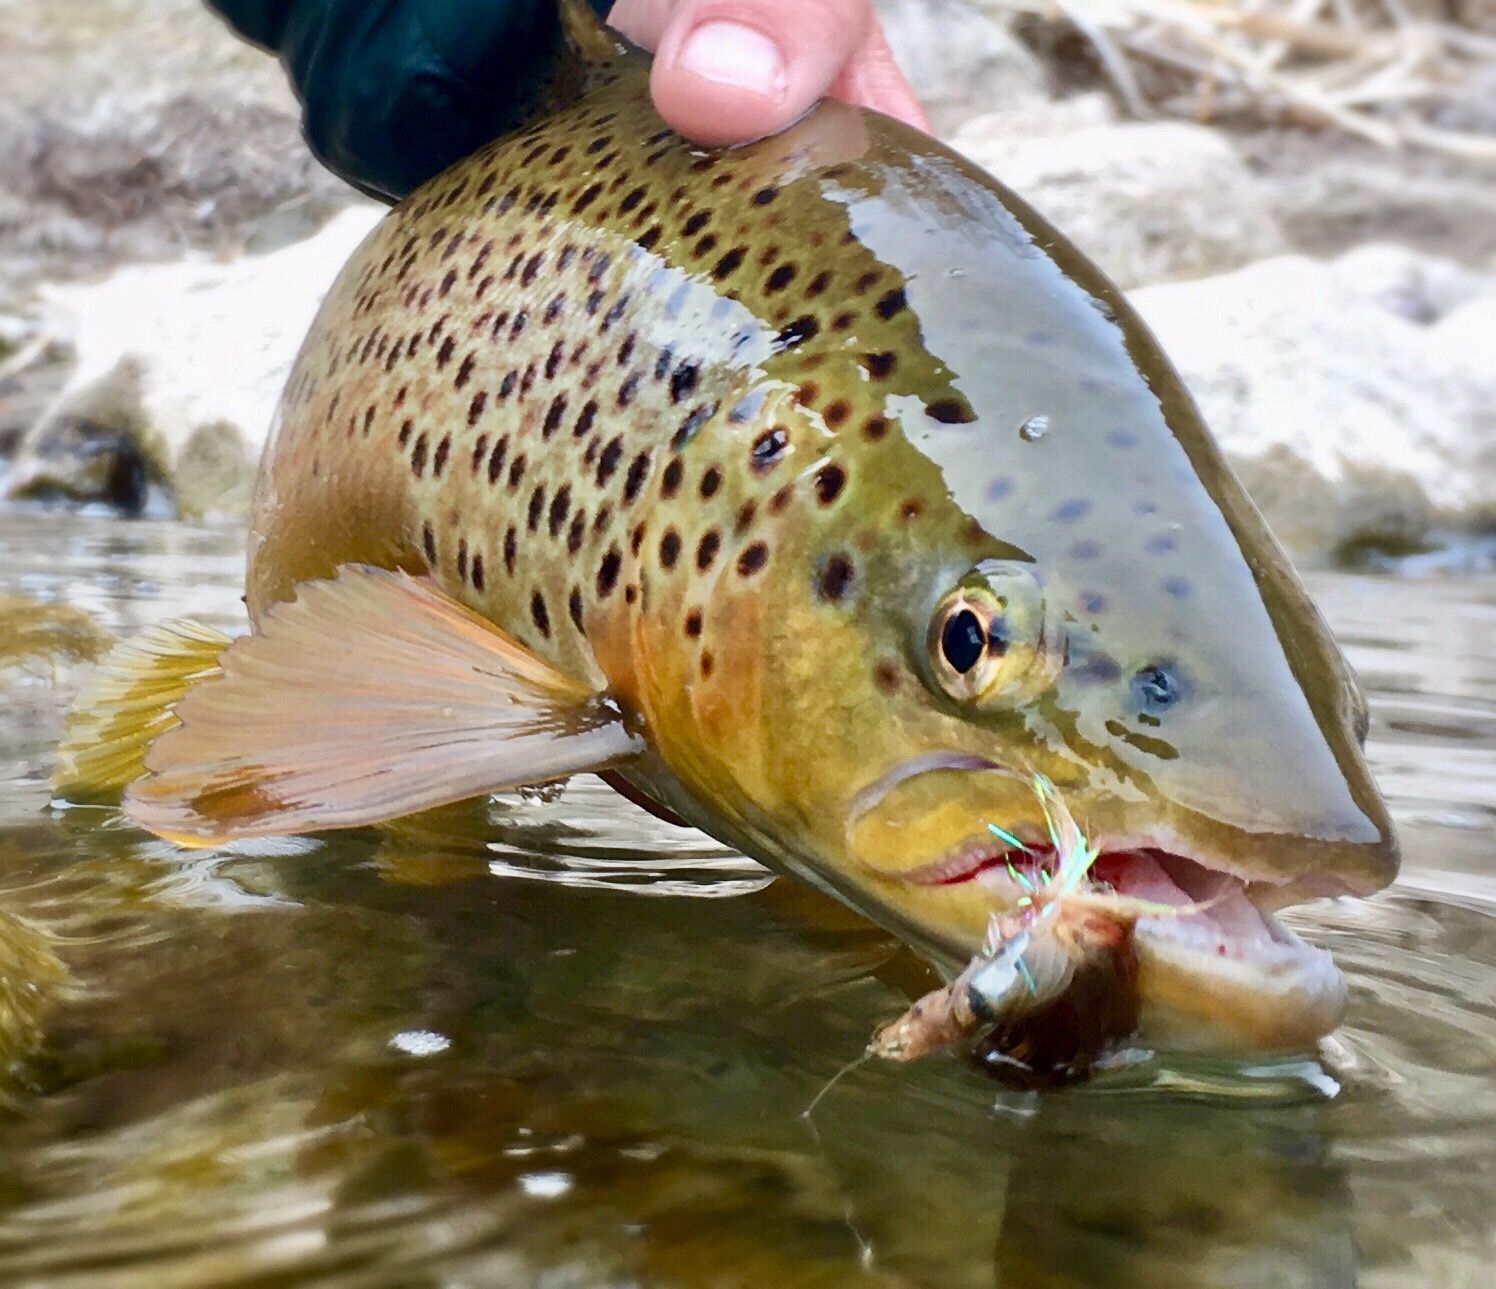 Lower Provo River Fishing Reports Fly Fishing Conditions